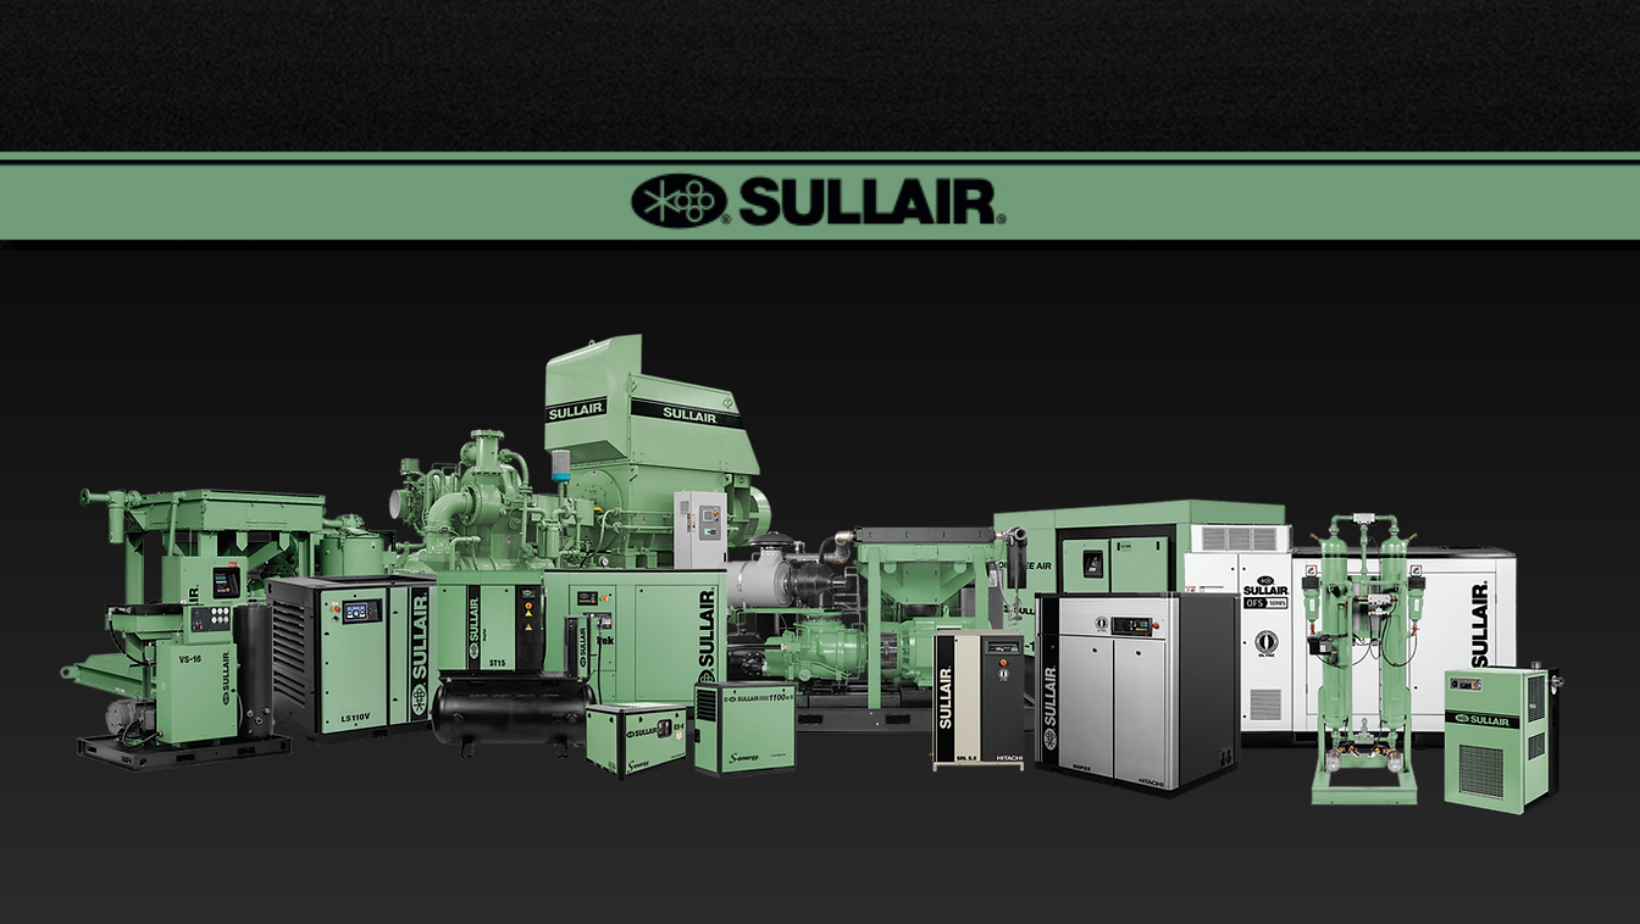 Sullair Stationary Product Line